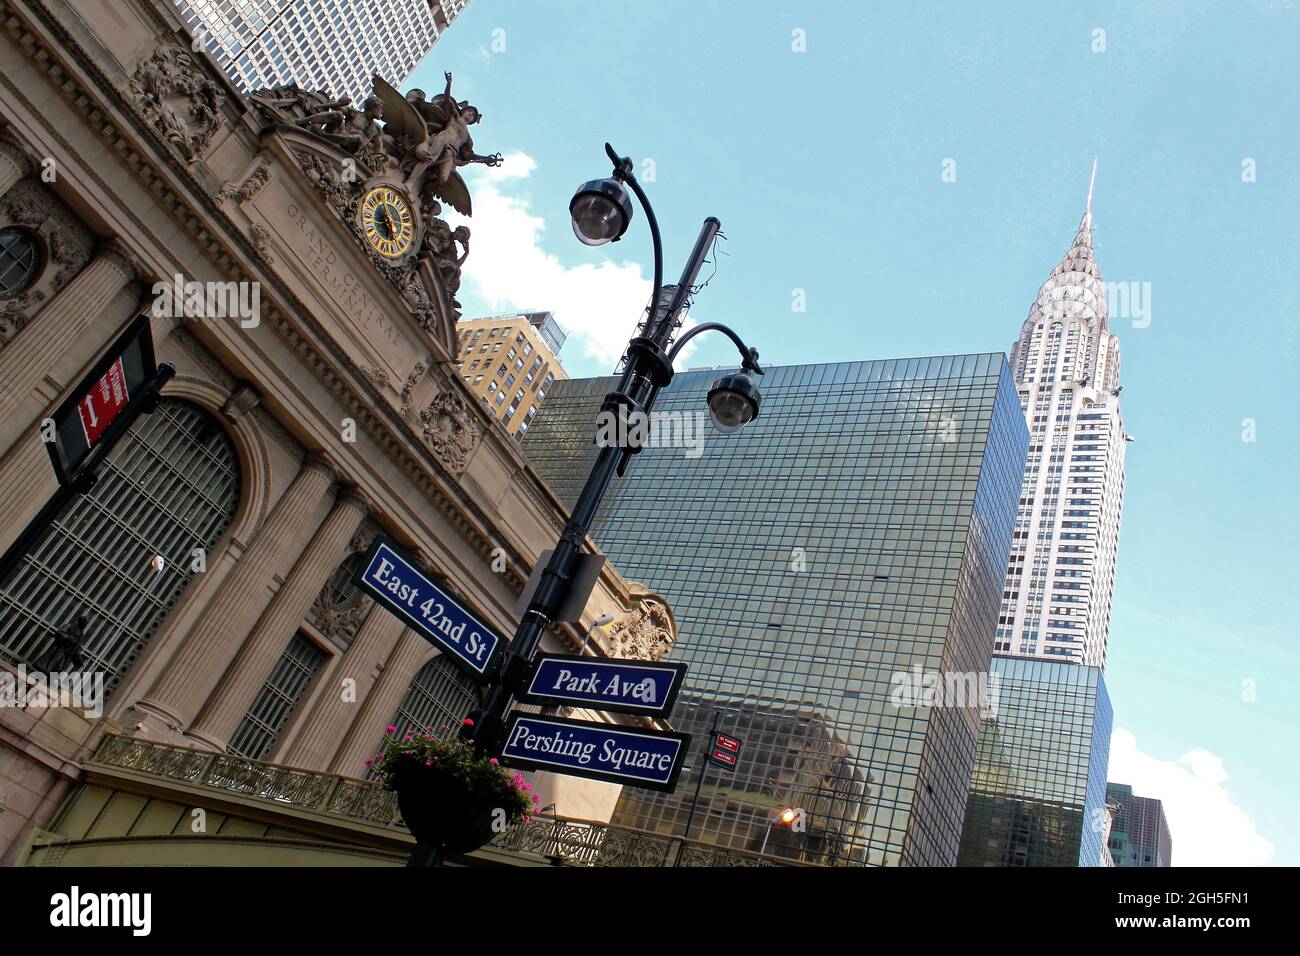 New York, USA - August 6, 2014: Grand central terminal and Chrysler building in New York City Stock Photo